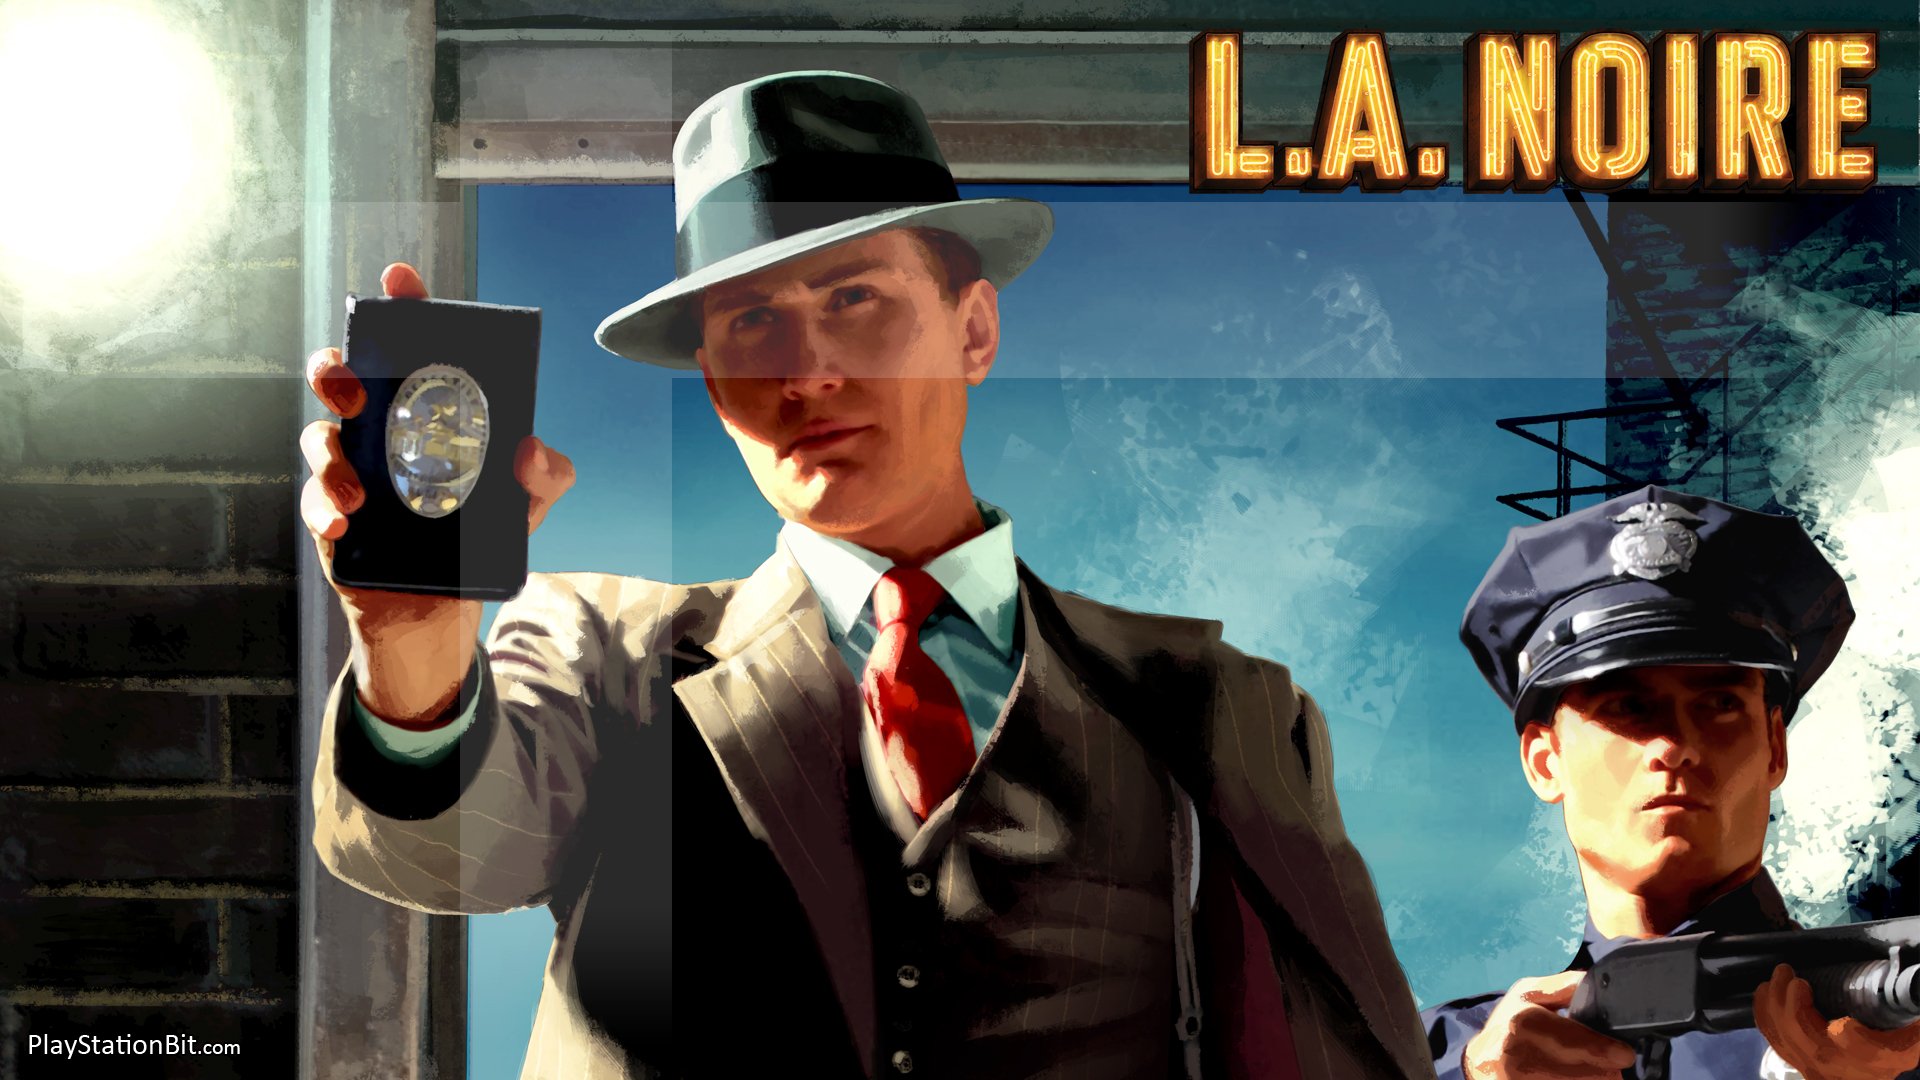 la noire wallpaper,movie,pc game,adventure game,shooter game,games